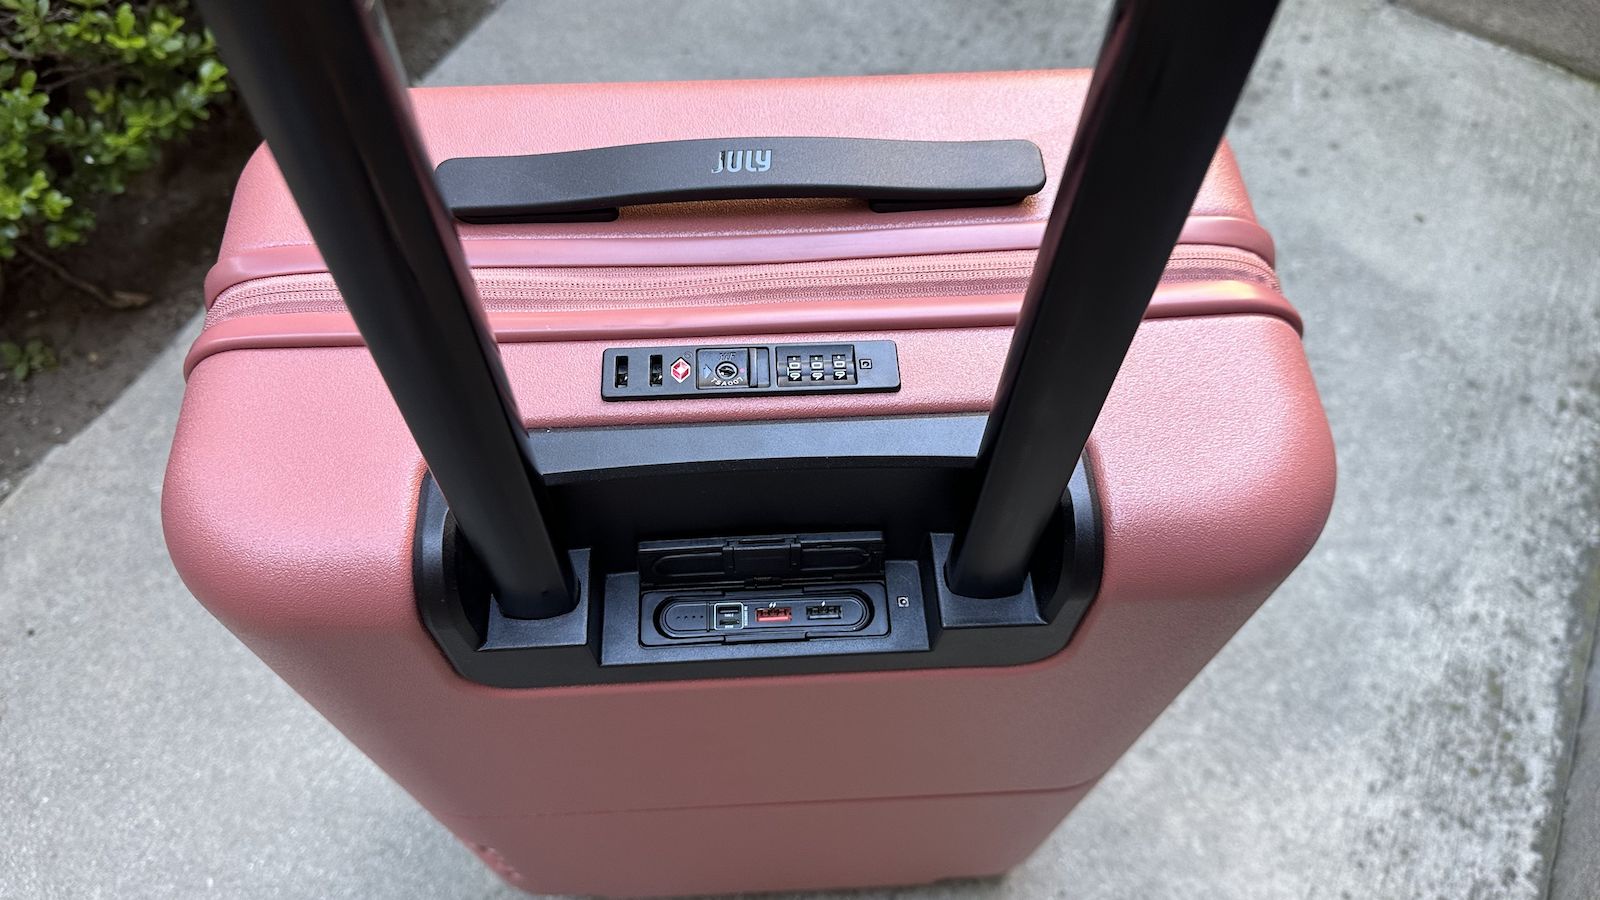 July Carry-On Pro SnapSleeve Luggage review | CNN Underscored